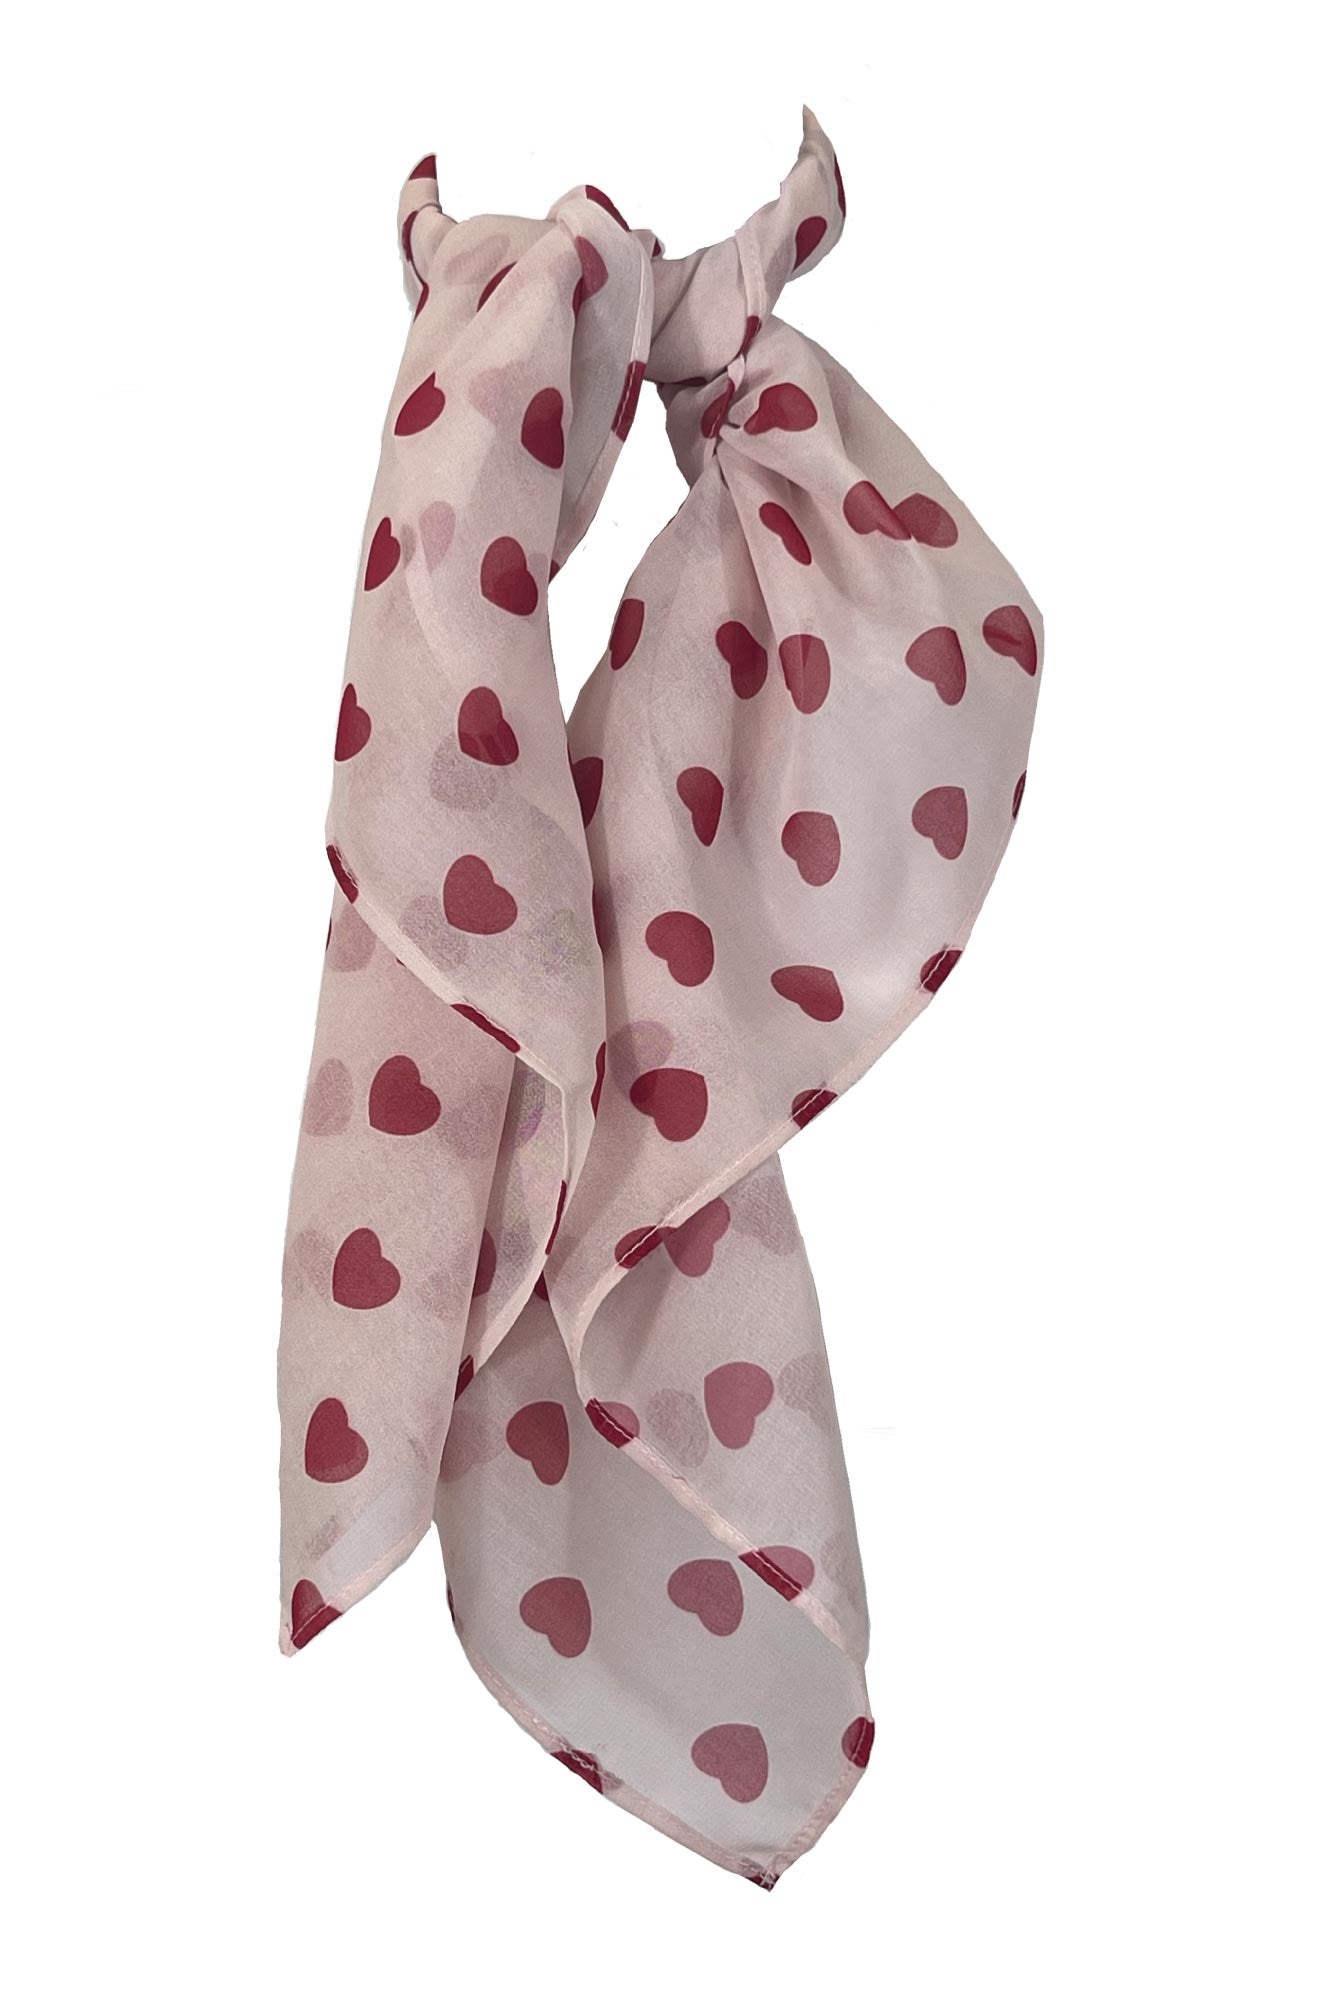 Scarf in White with Red Hearts